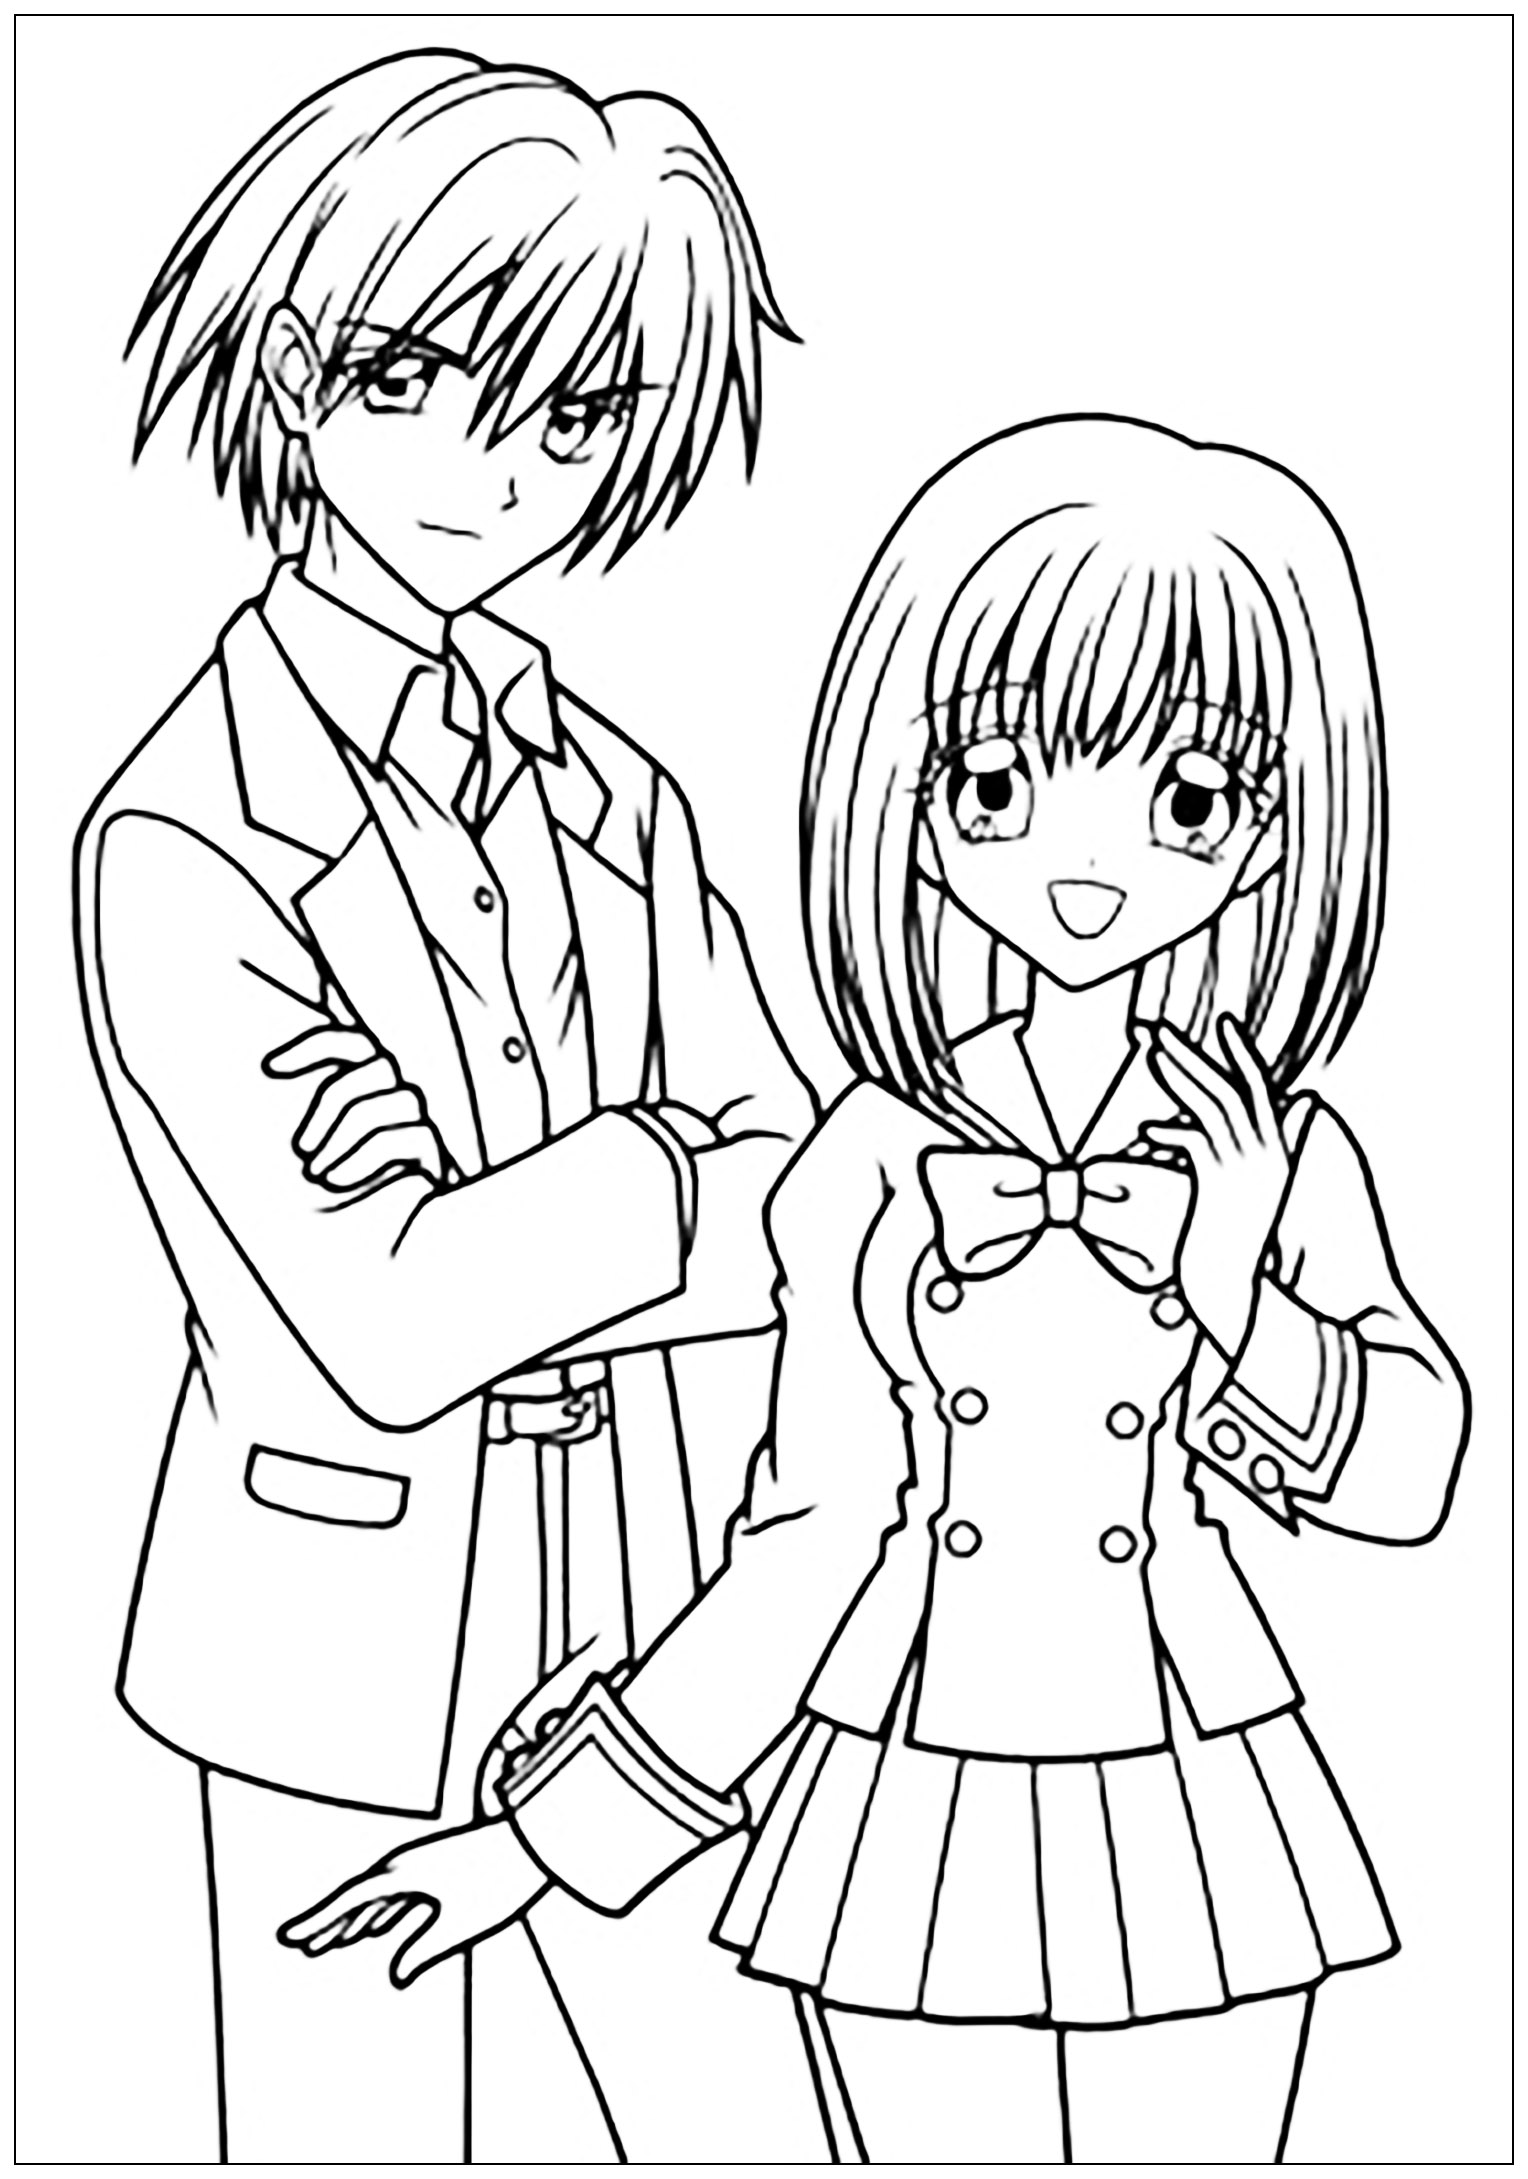 coloring manga drawing boy and girl in school suit